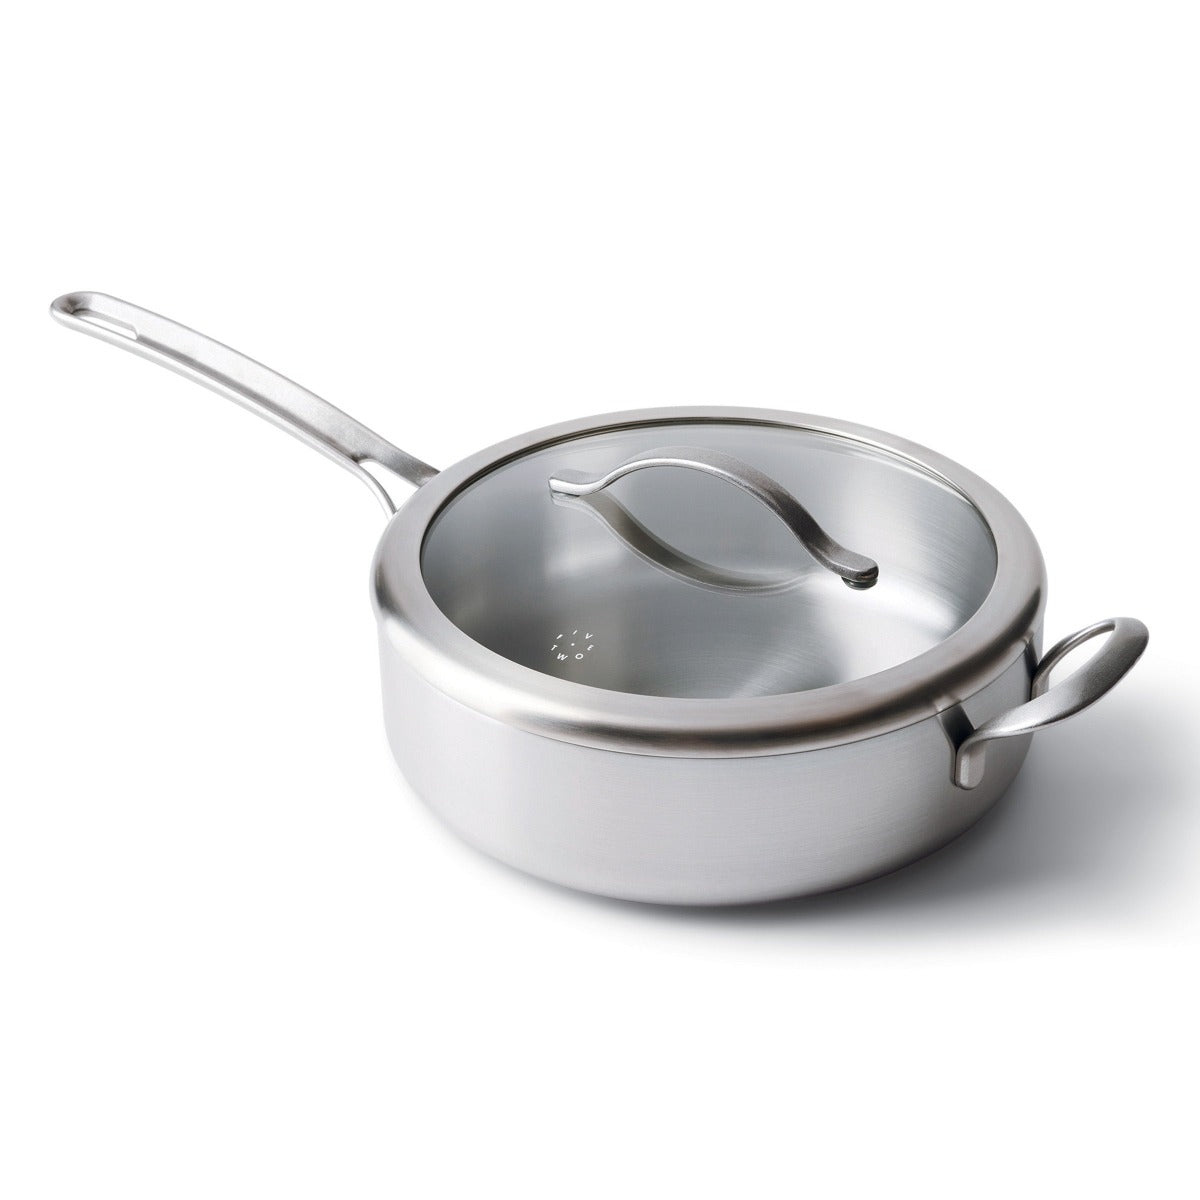 Five Two Essential Cookware Set from Food52, Nonstick & Stainless Steel on  Food52